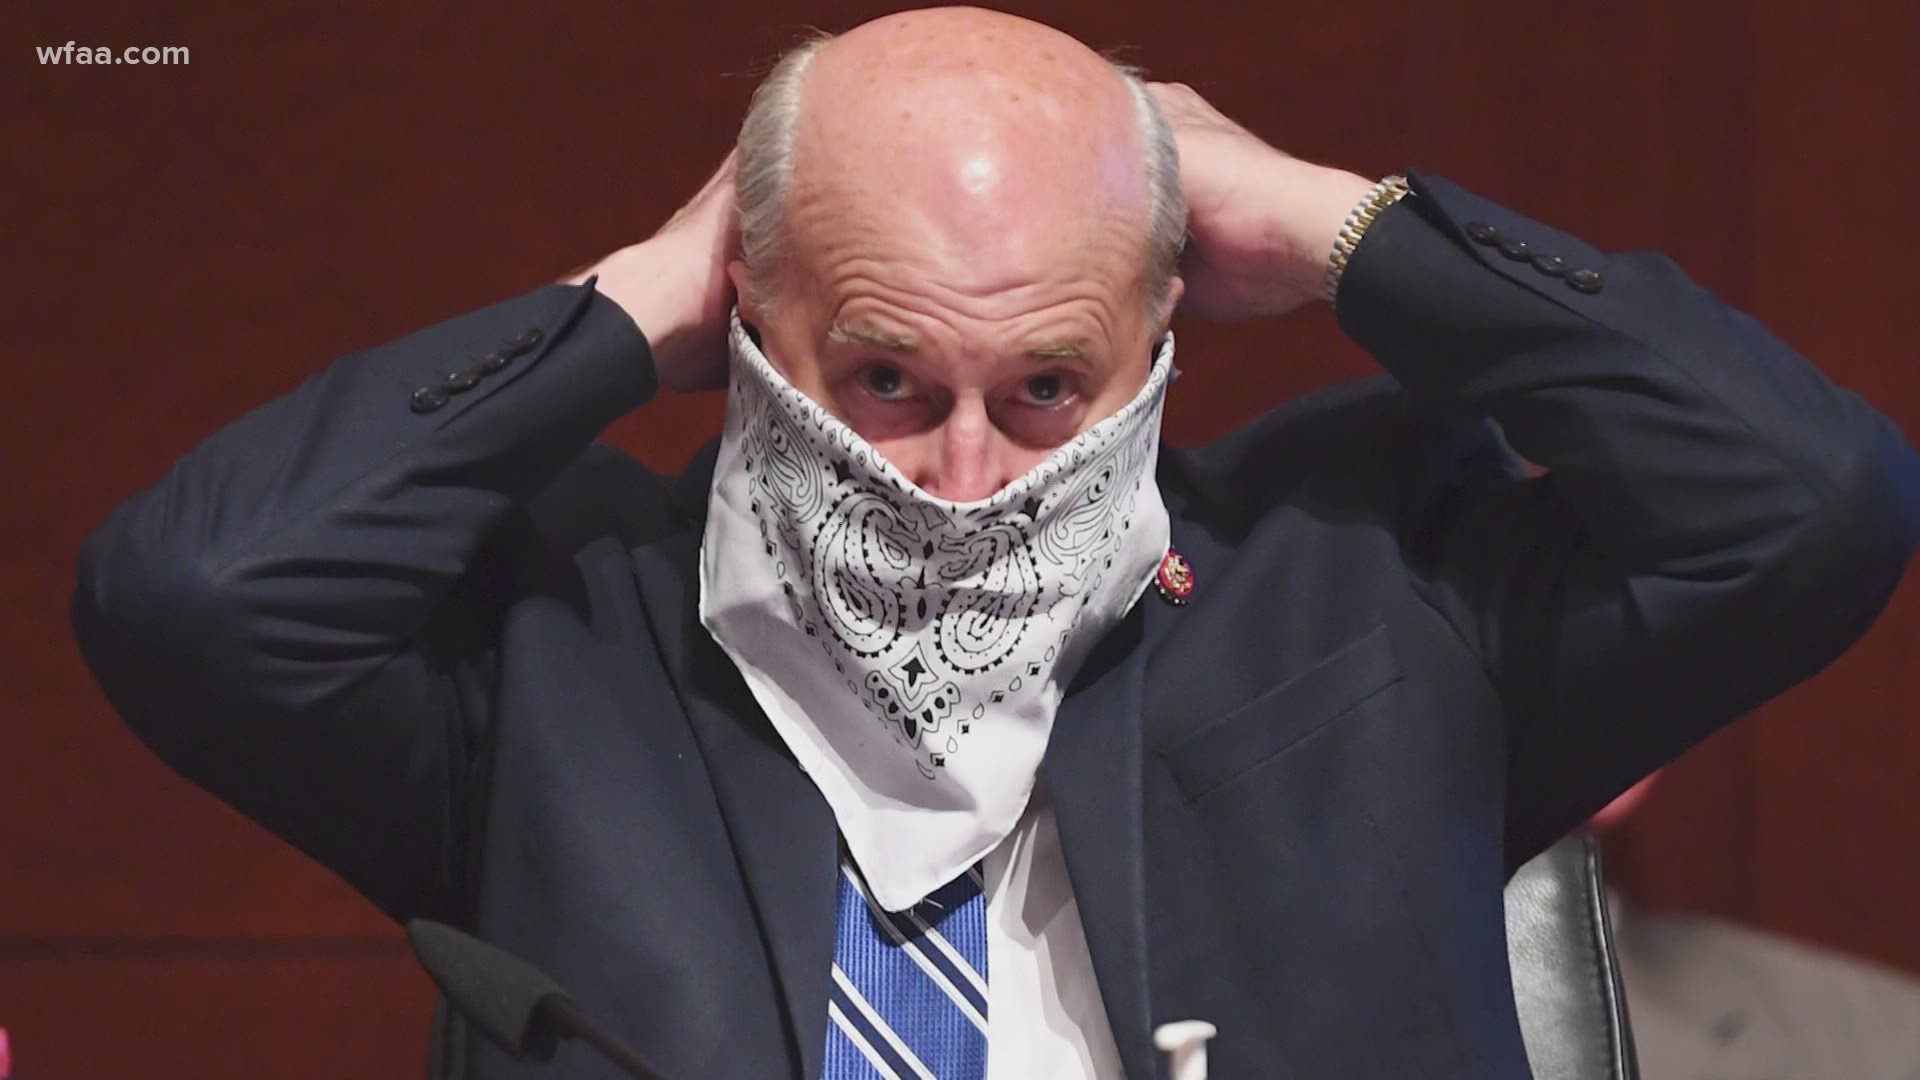 There’s no evidence COVID can be caught from mask, but Rep. Louie Gohmert said wearing one causes him to touch his face.